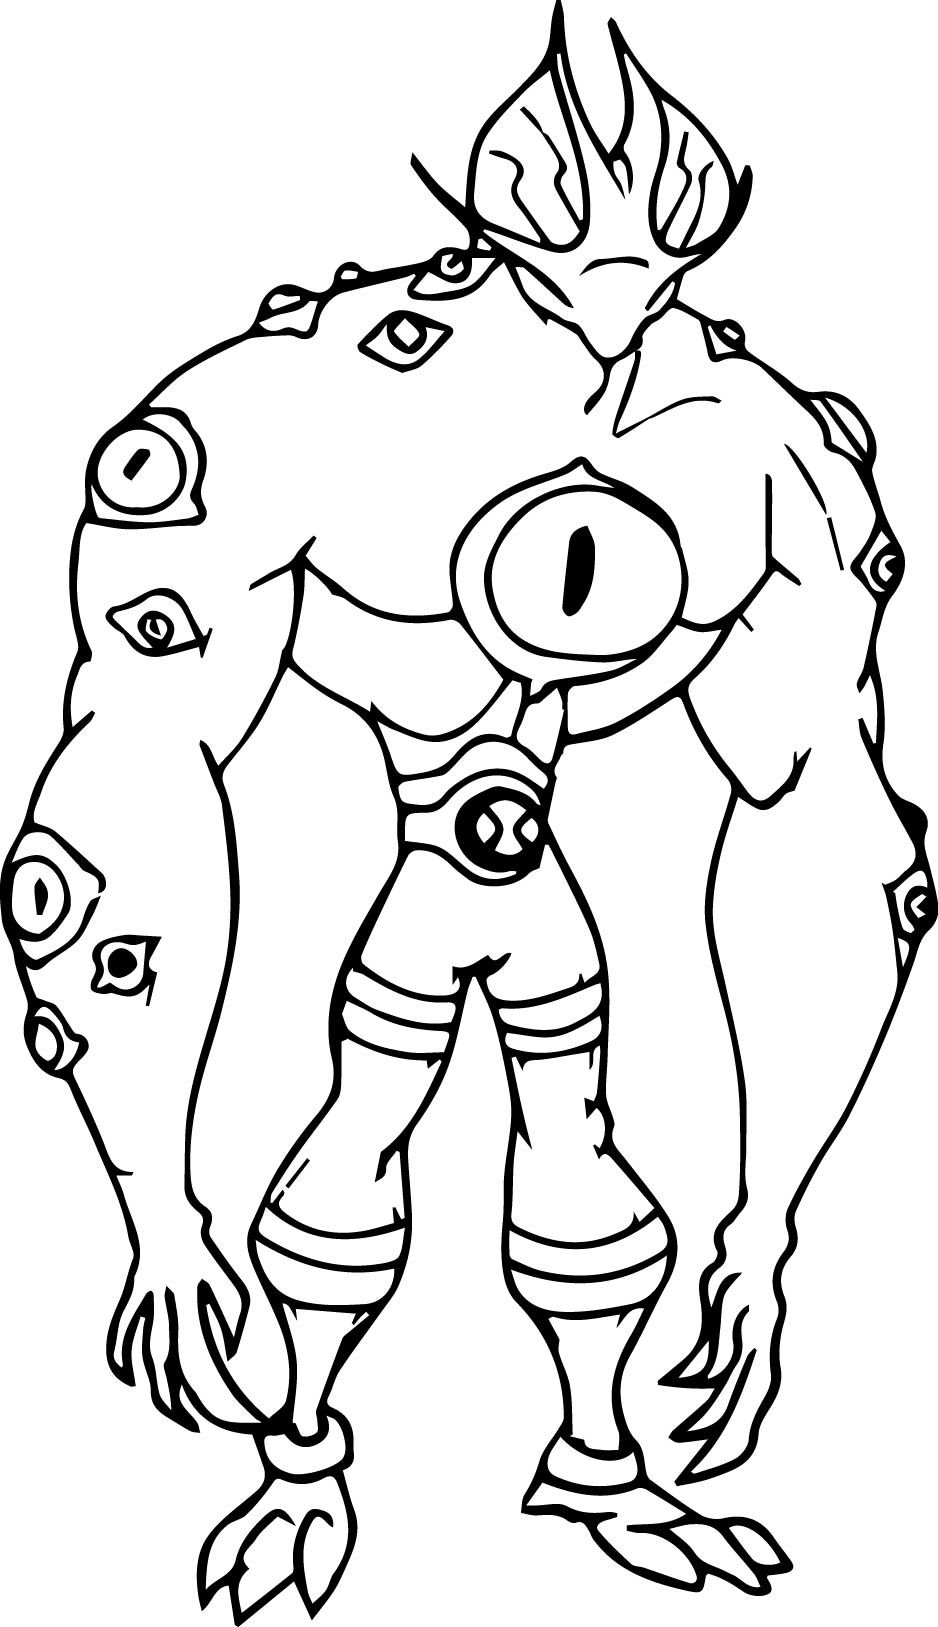 Creepy Eyes Guy Coloring Page - Free Printable Coloring Pages for Kids